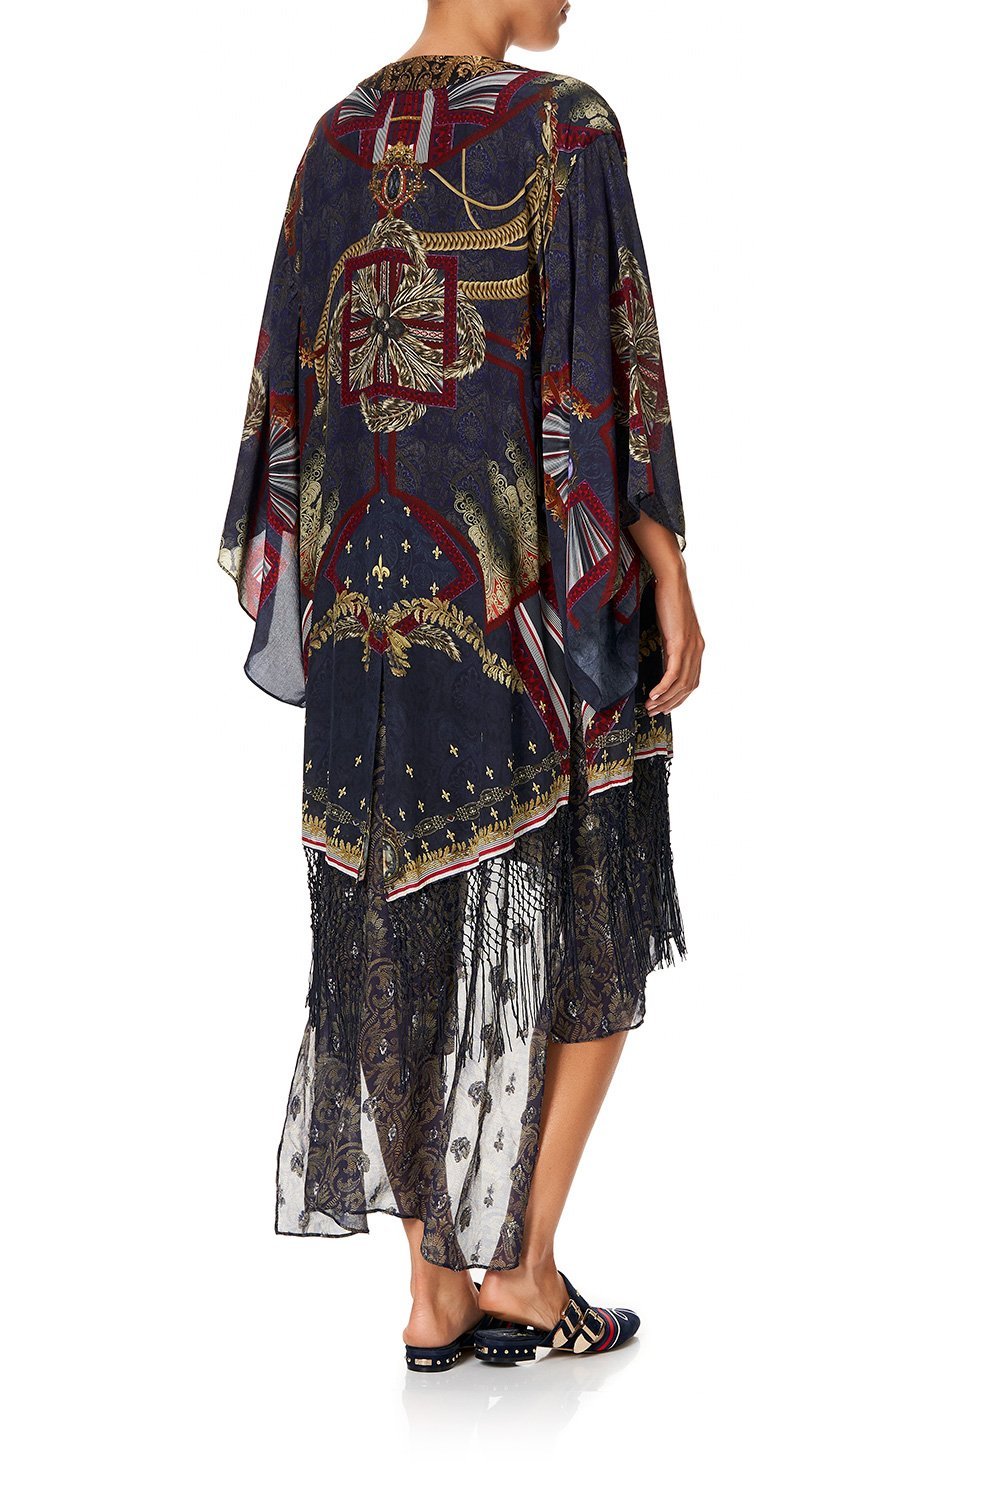 KIMONO WITH LONG UNDERLAY THIS CHARMING WOMAN